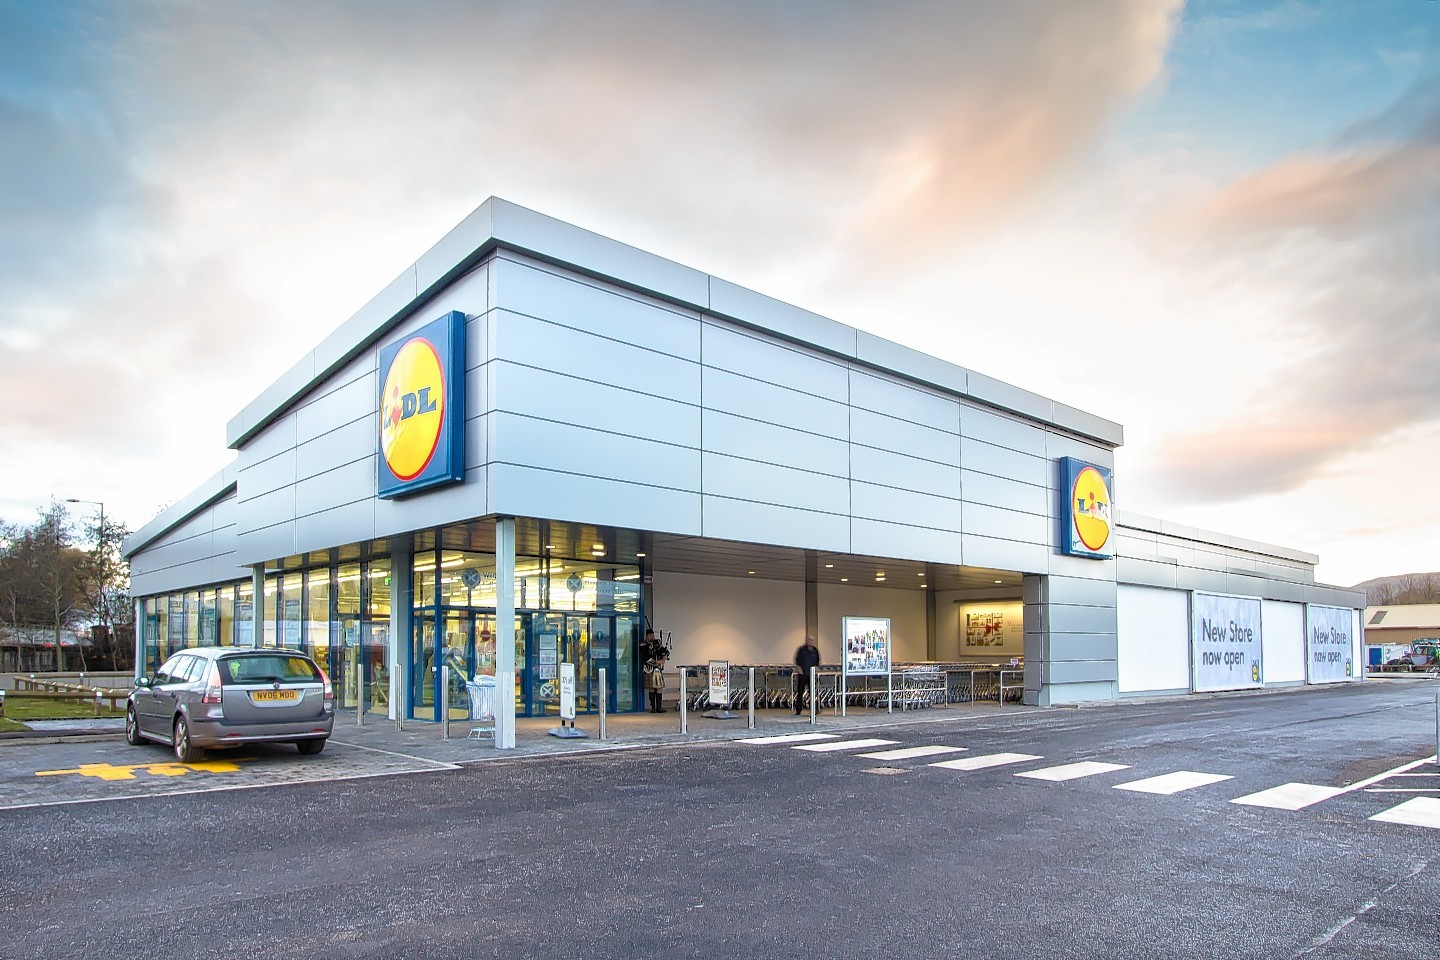 This is how a new Lidl store might look